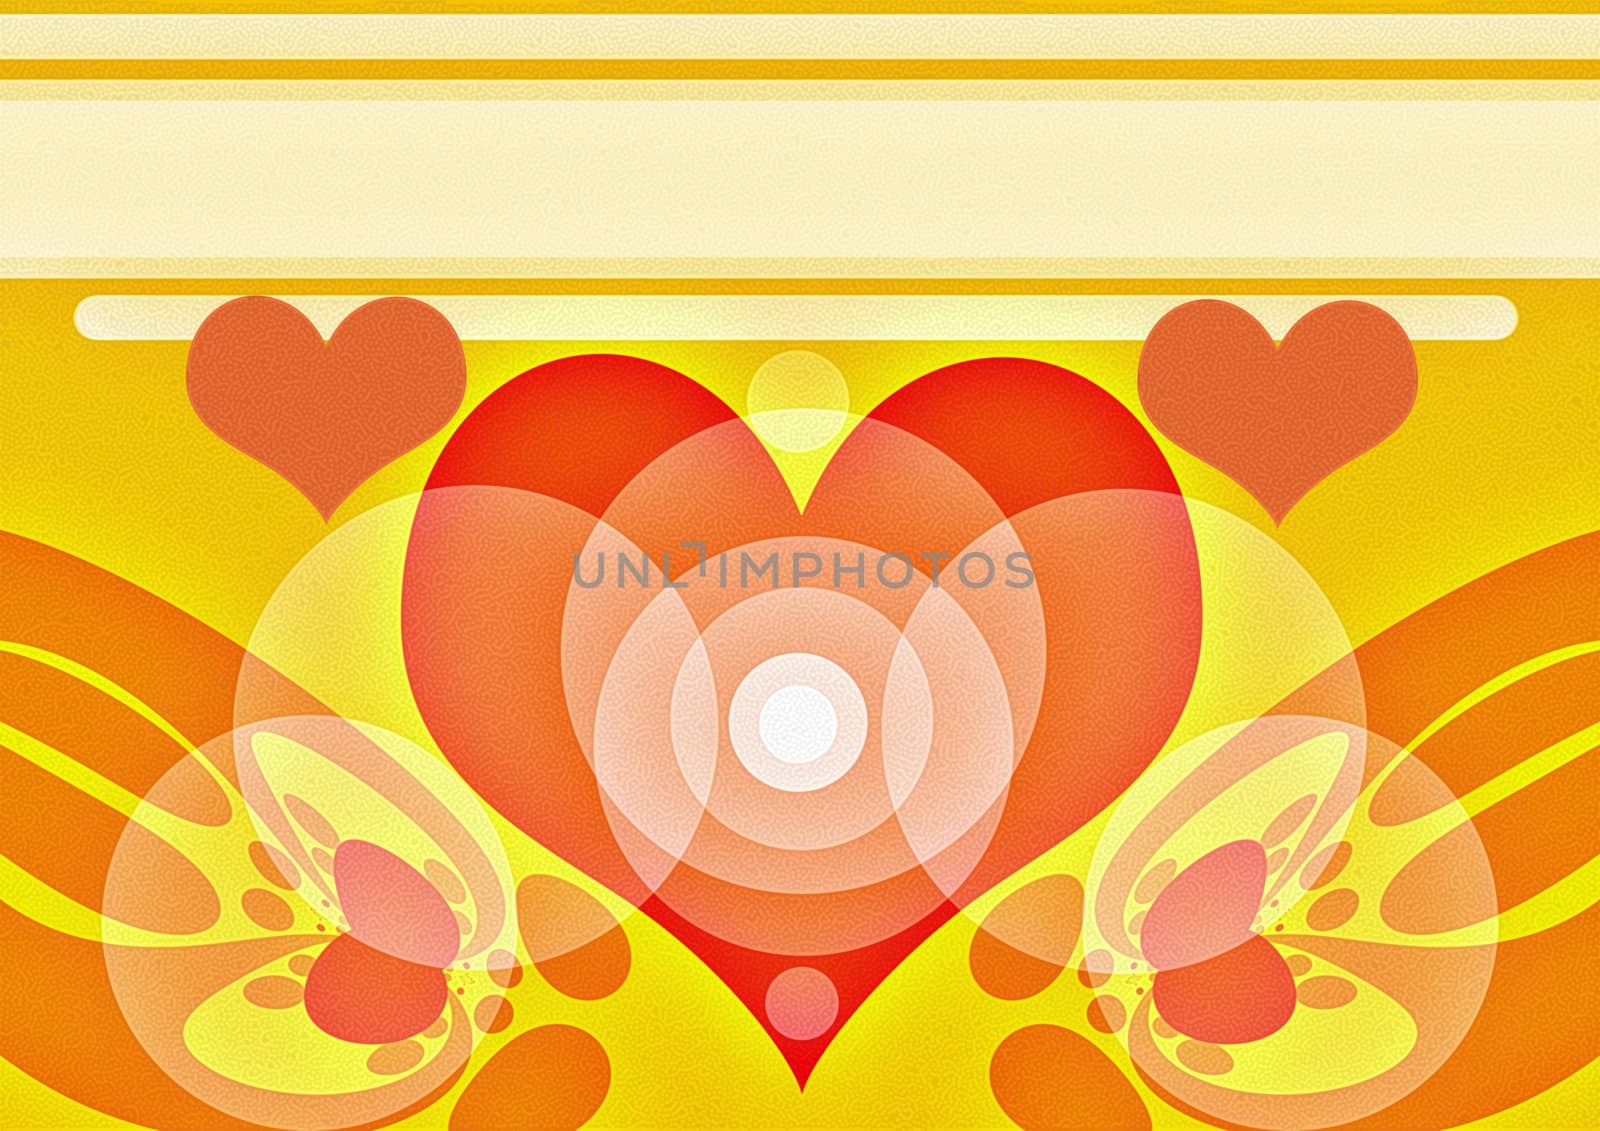 abstract creative symbolic fantasy image background with hearts